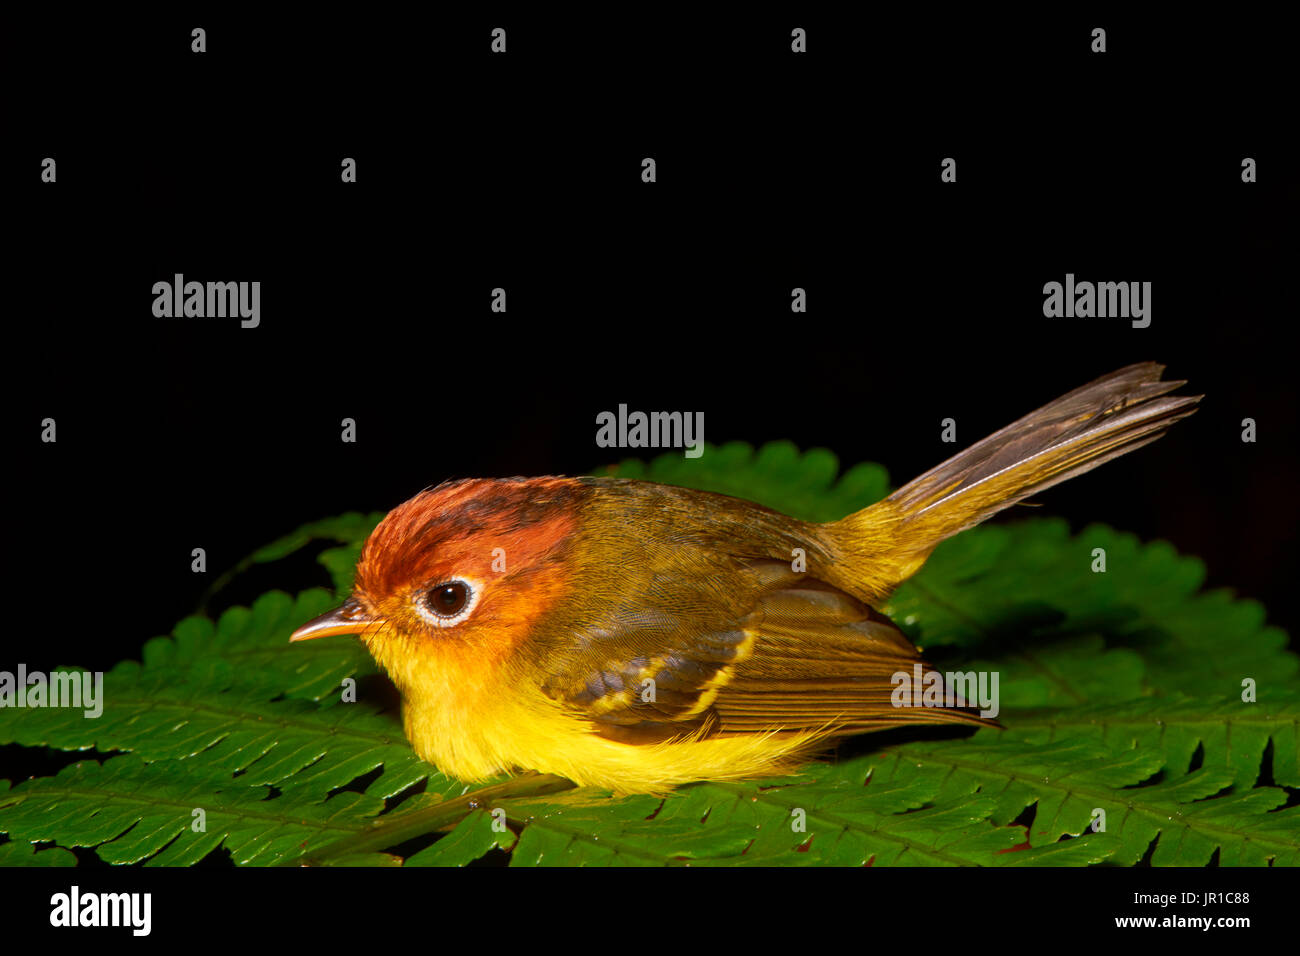 Yellow-breasted Warbler (Seicercus montis) on fern, Danum valley, Sabah, Borneo, Malaysia Stock Photo